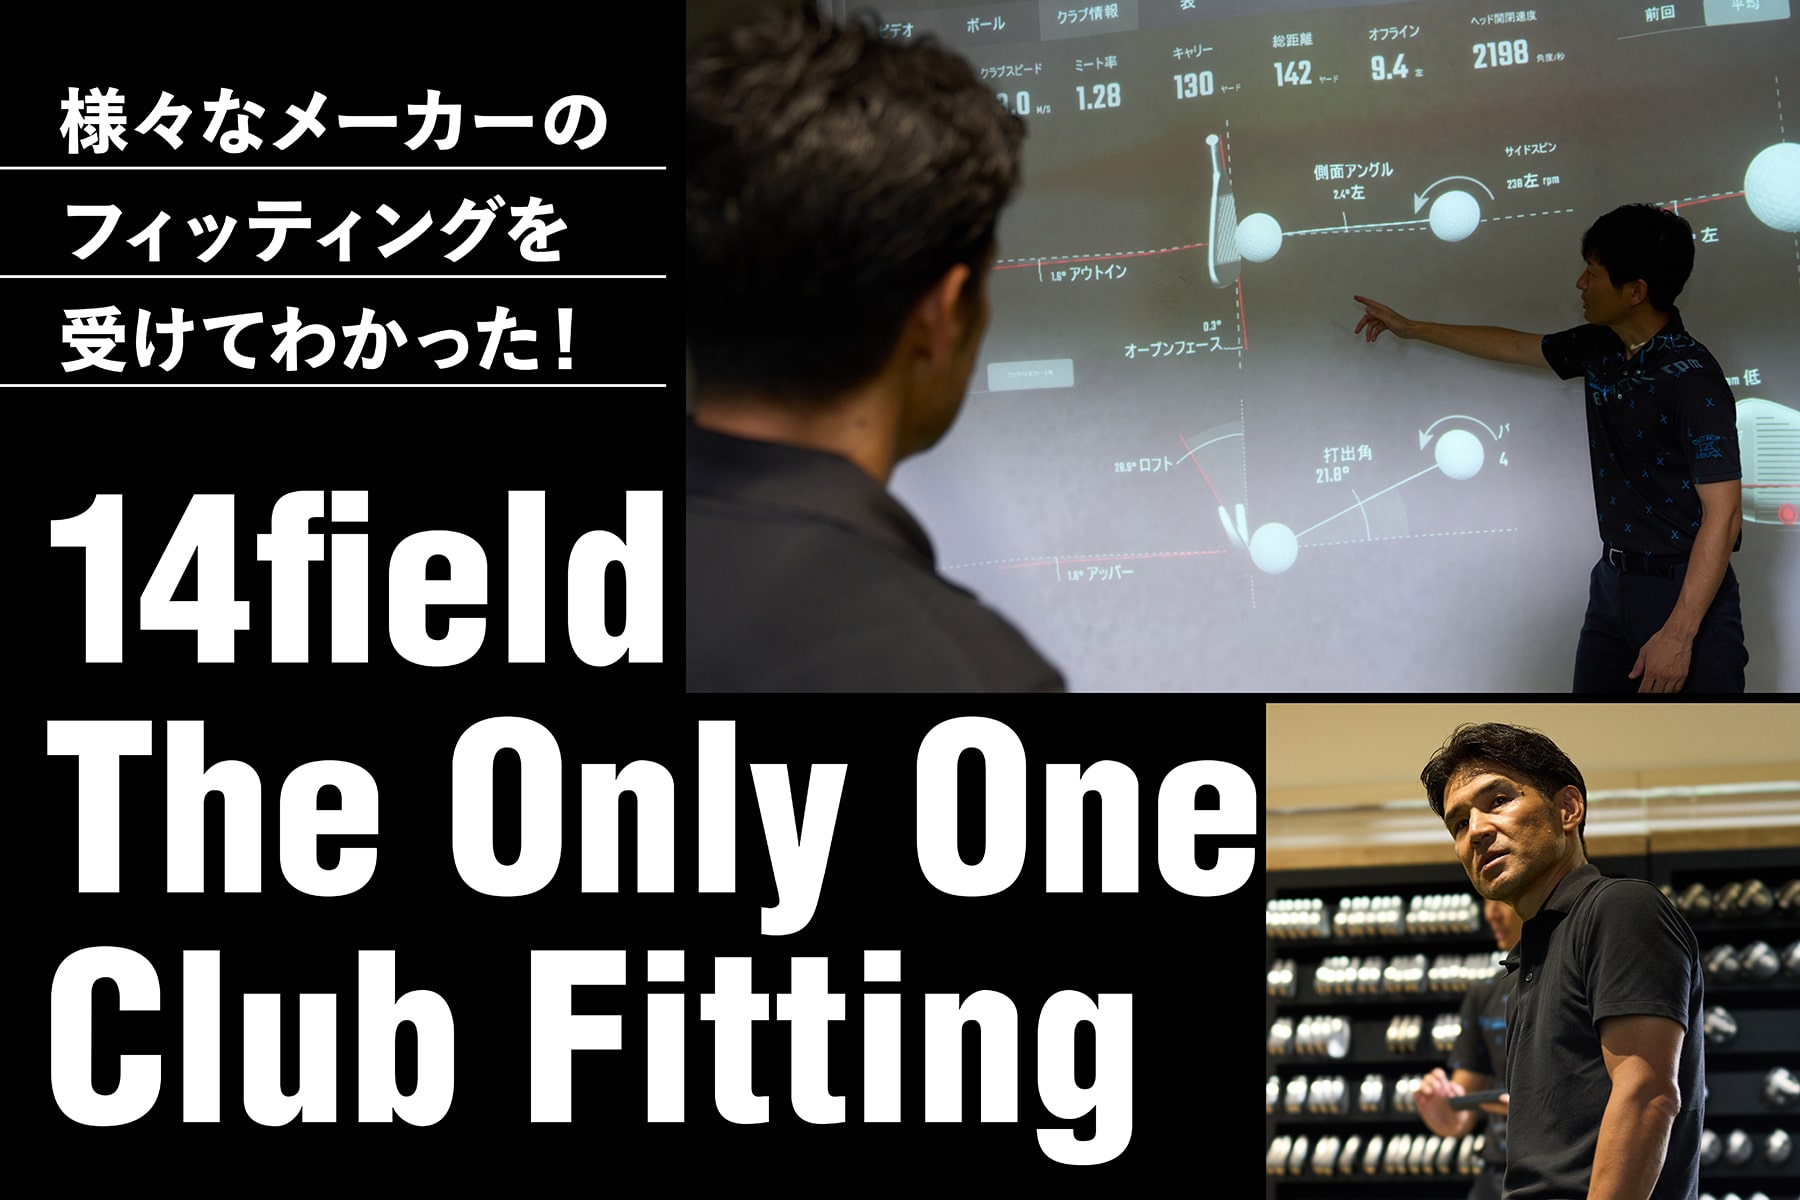 14field
The Only One
Club Fitting